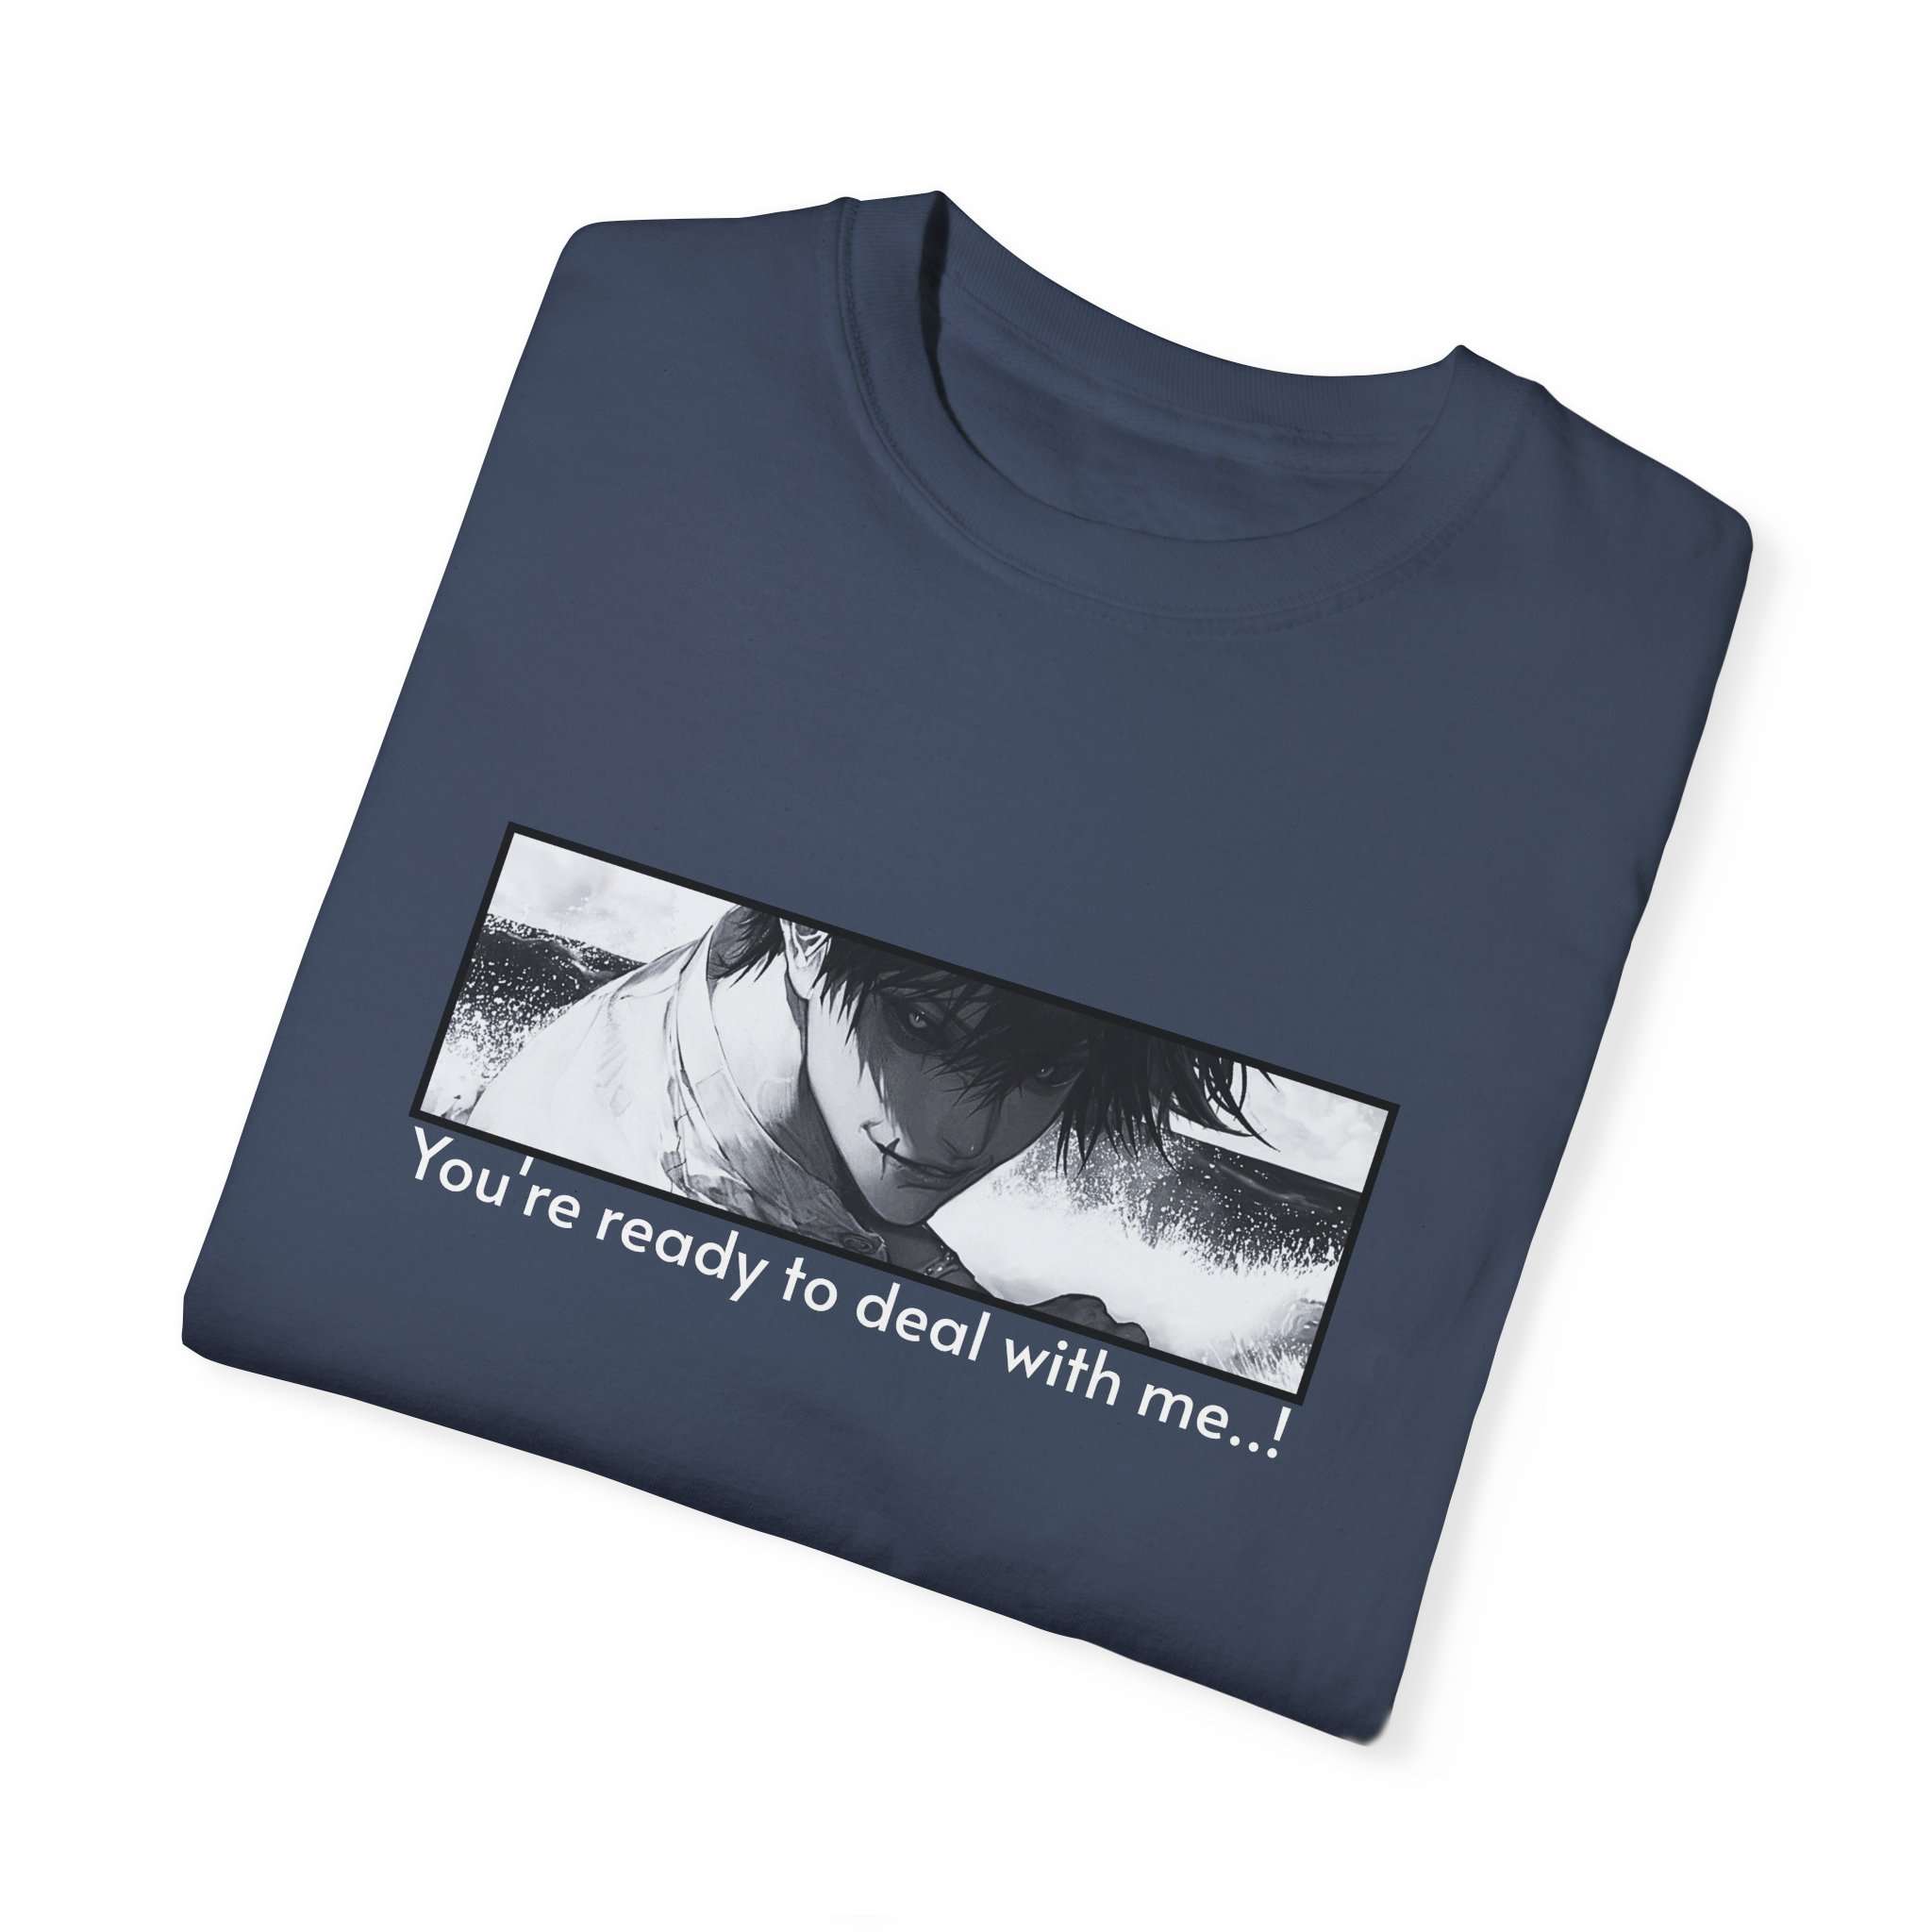 Toji Fushiguro Character Design Unisex Garment-Dyed T-shirt with 'You're Ready to Deal with Me' Quote